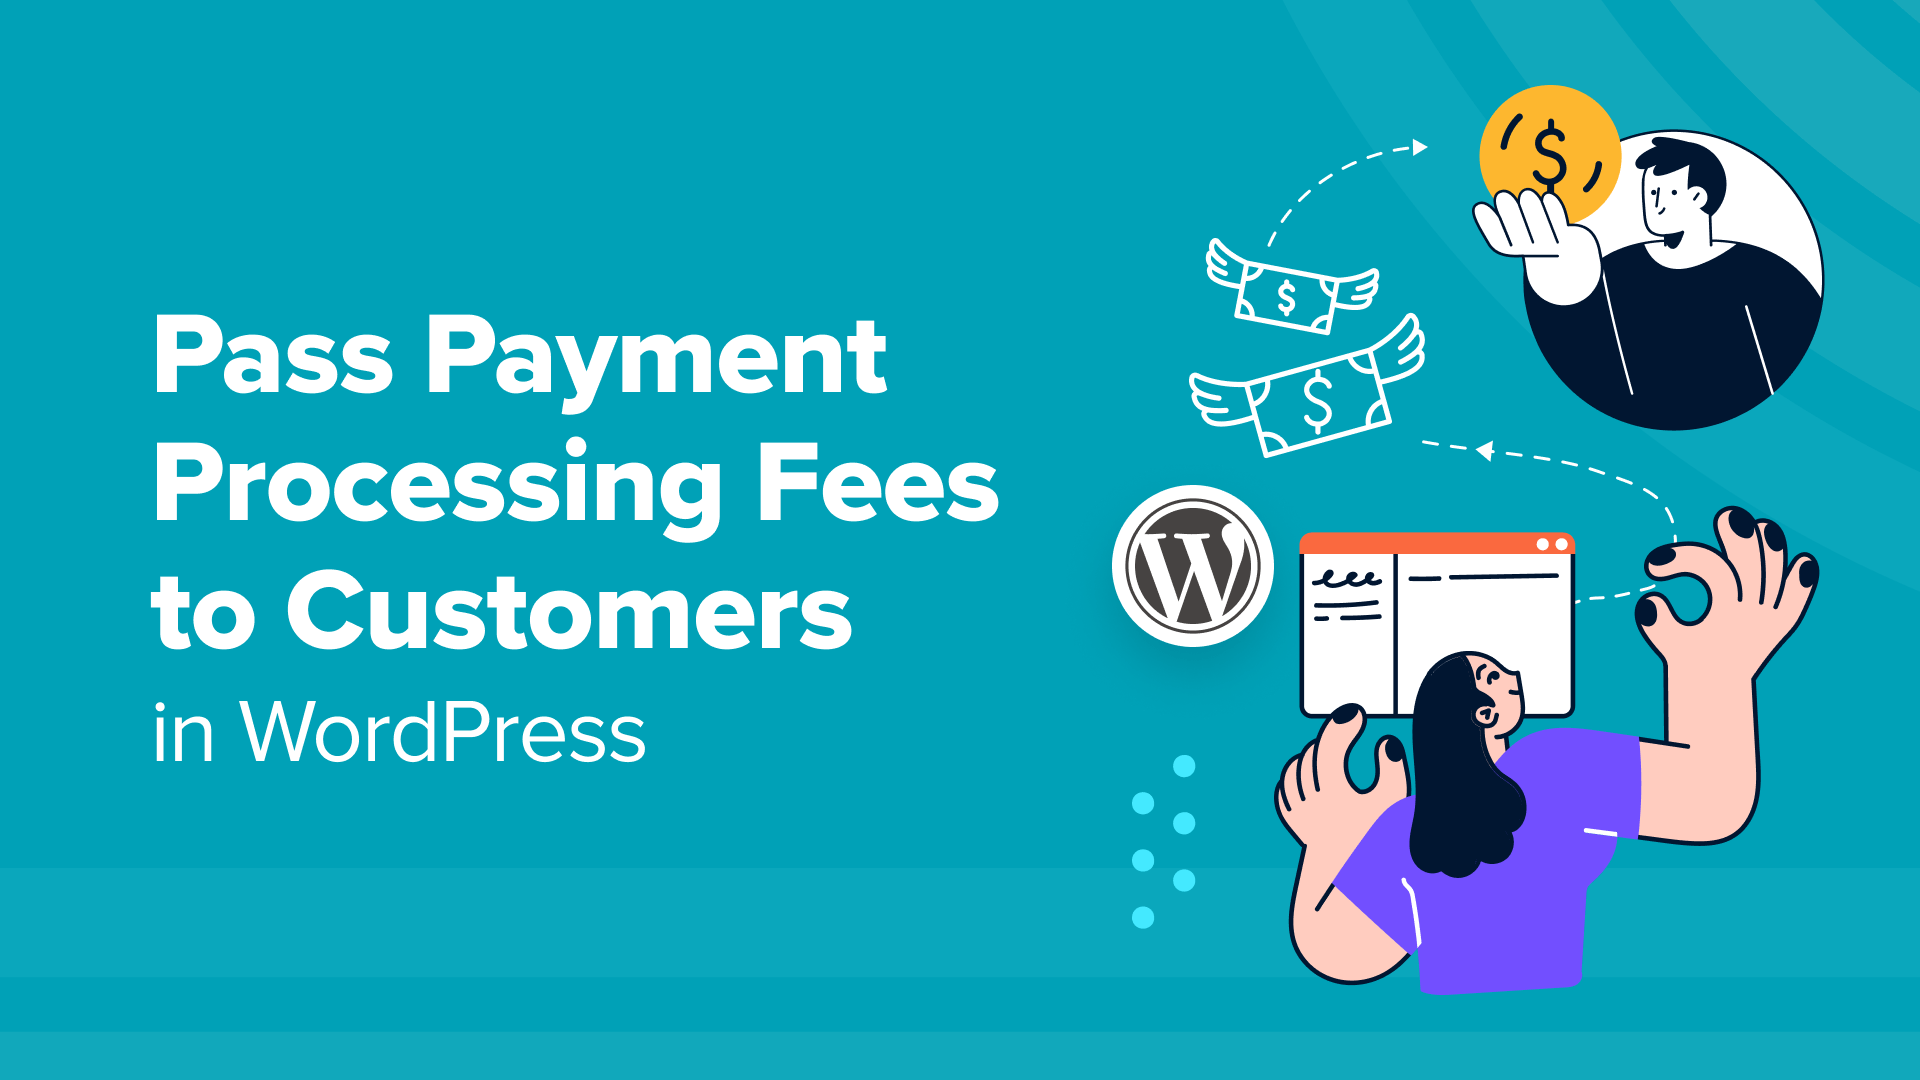 How to Pass Payment Processing Fees to Customers in WordPress